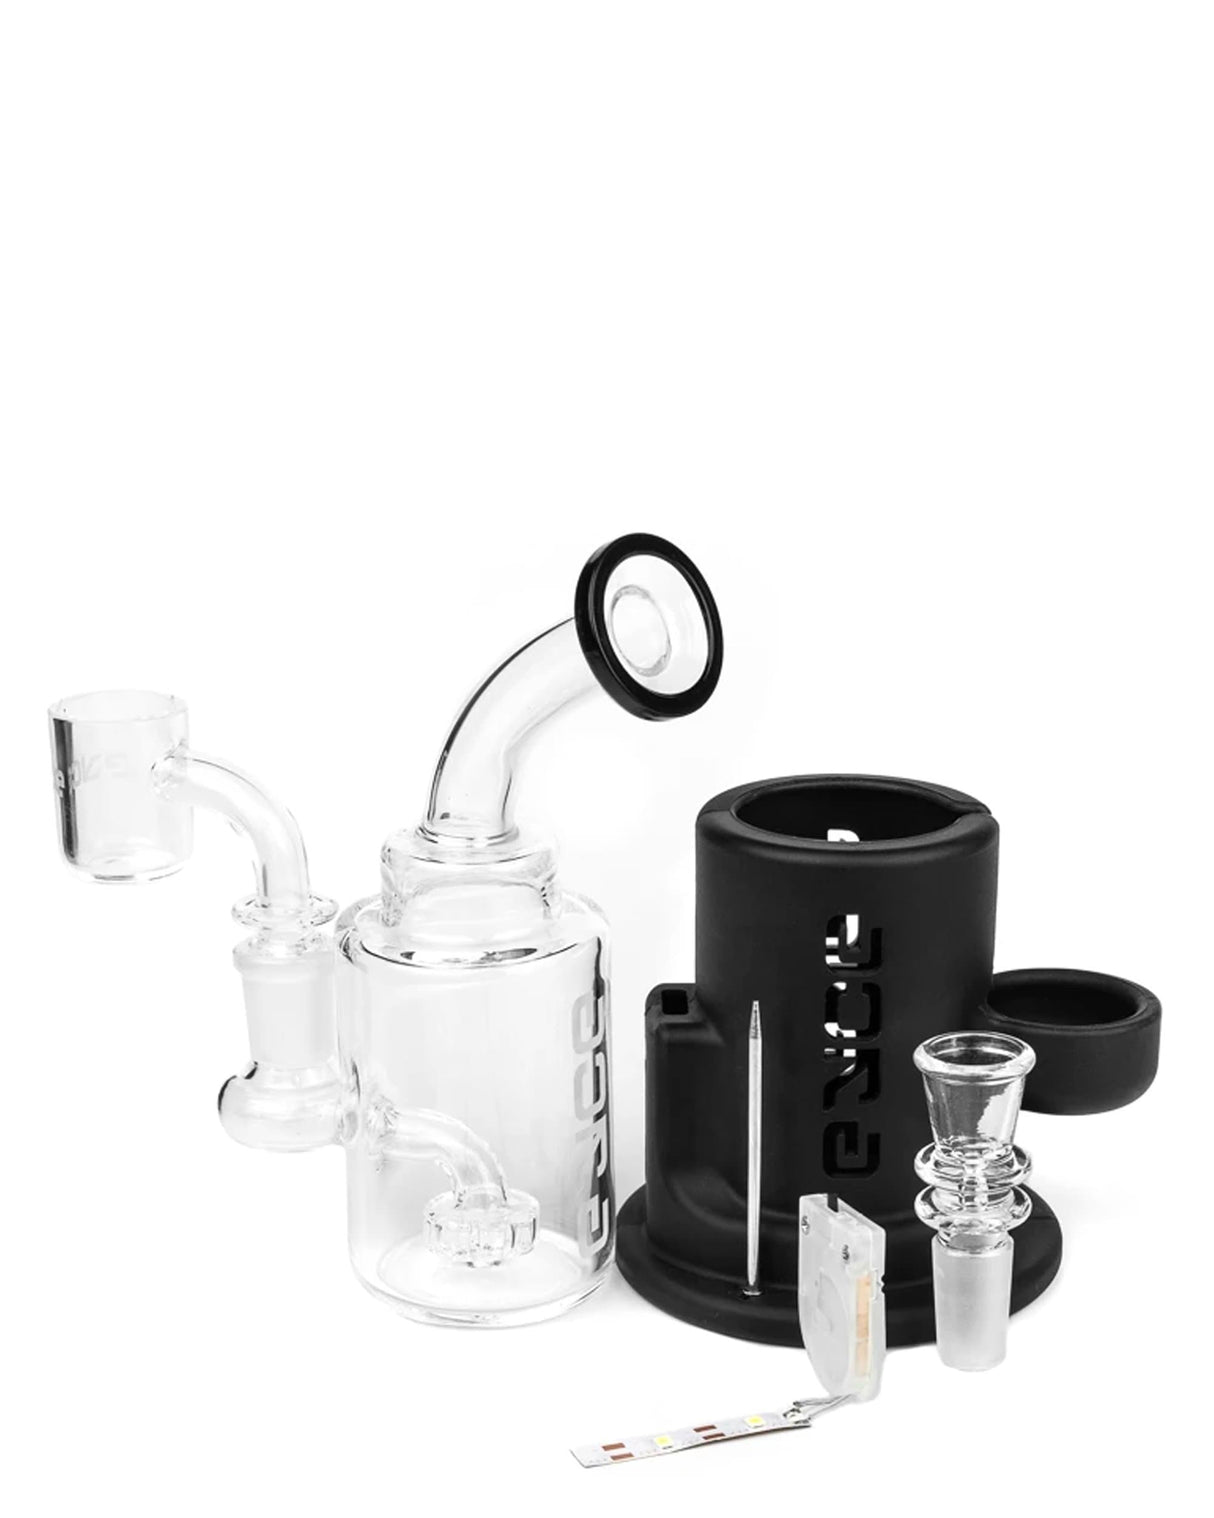 Eyce Spark Dab Rig in Black with Showerhead Percolator, Side View on White Background